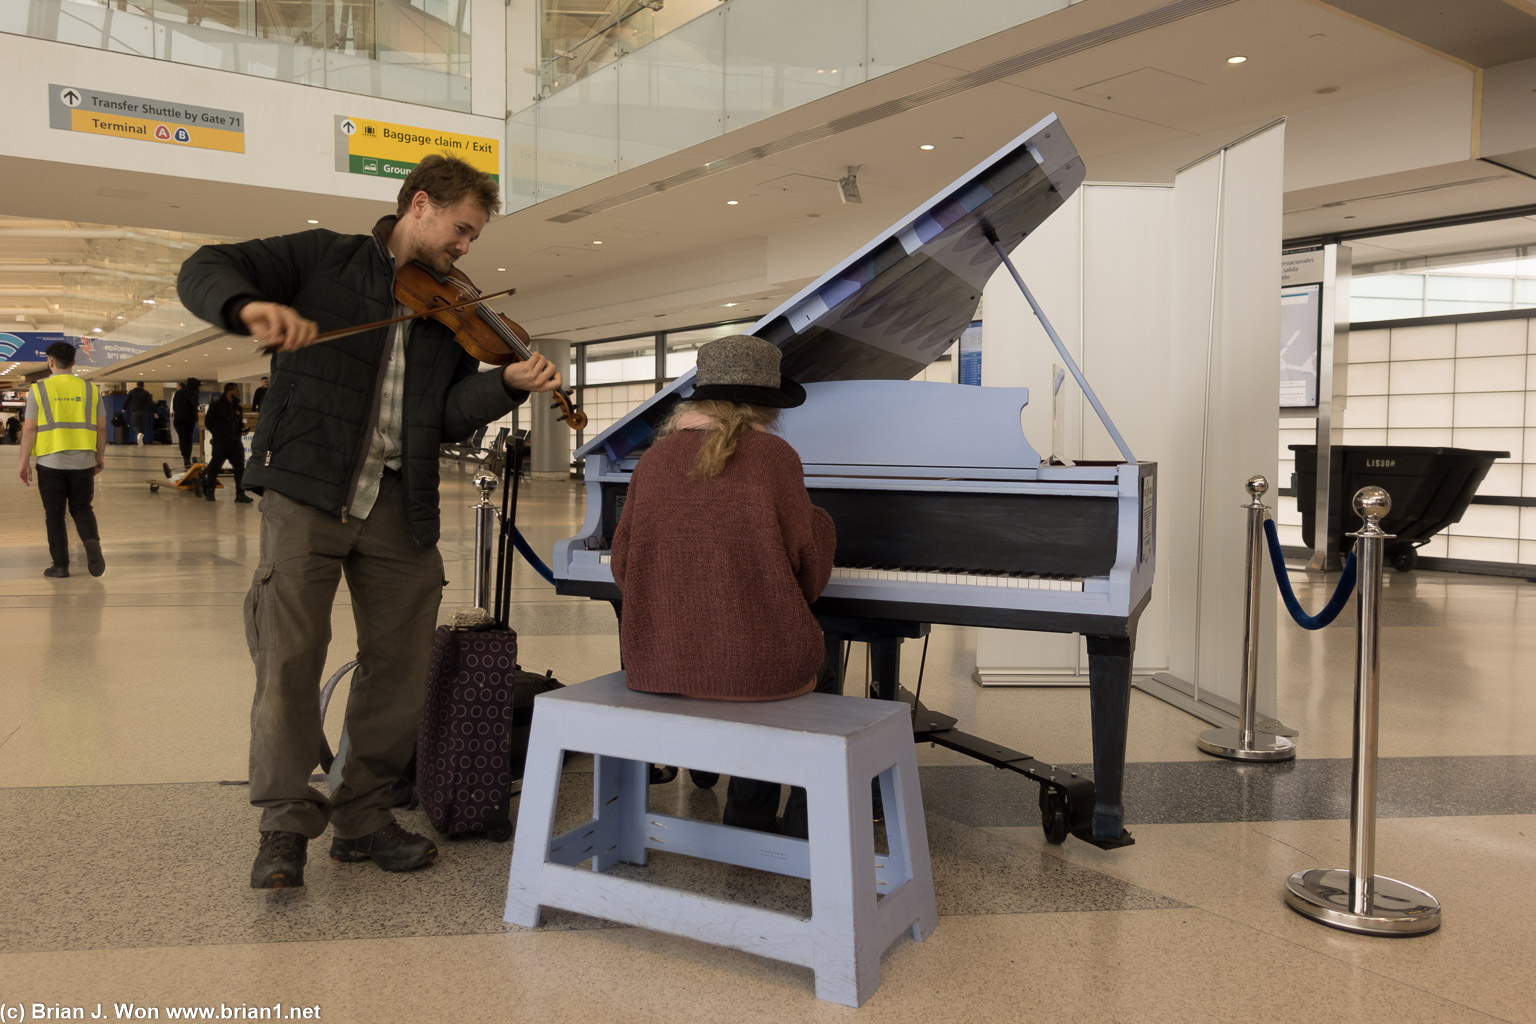 Newark Airport has a bunch of pianos, I suspect the violinist brought his own.